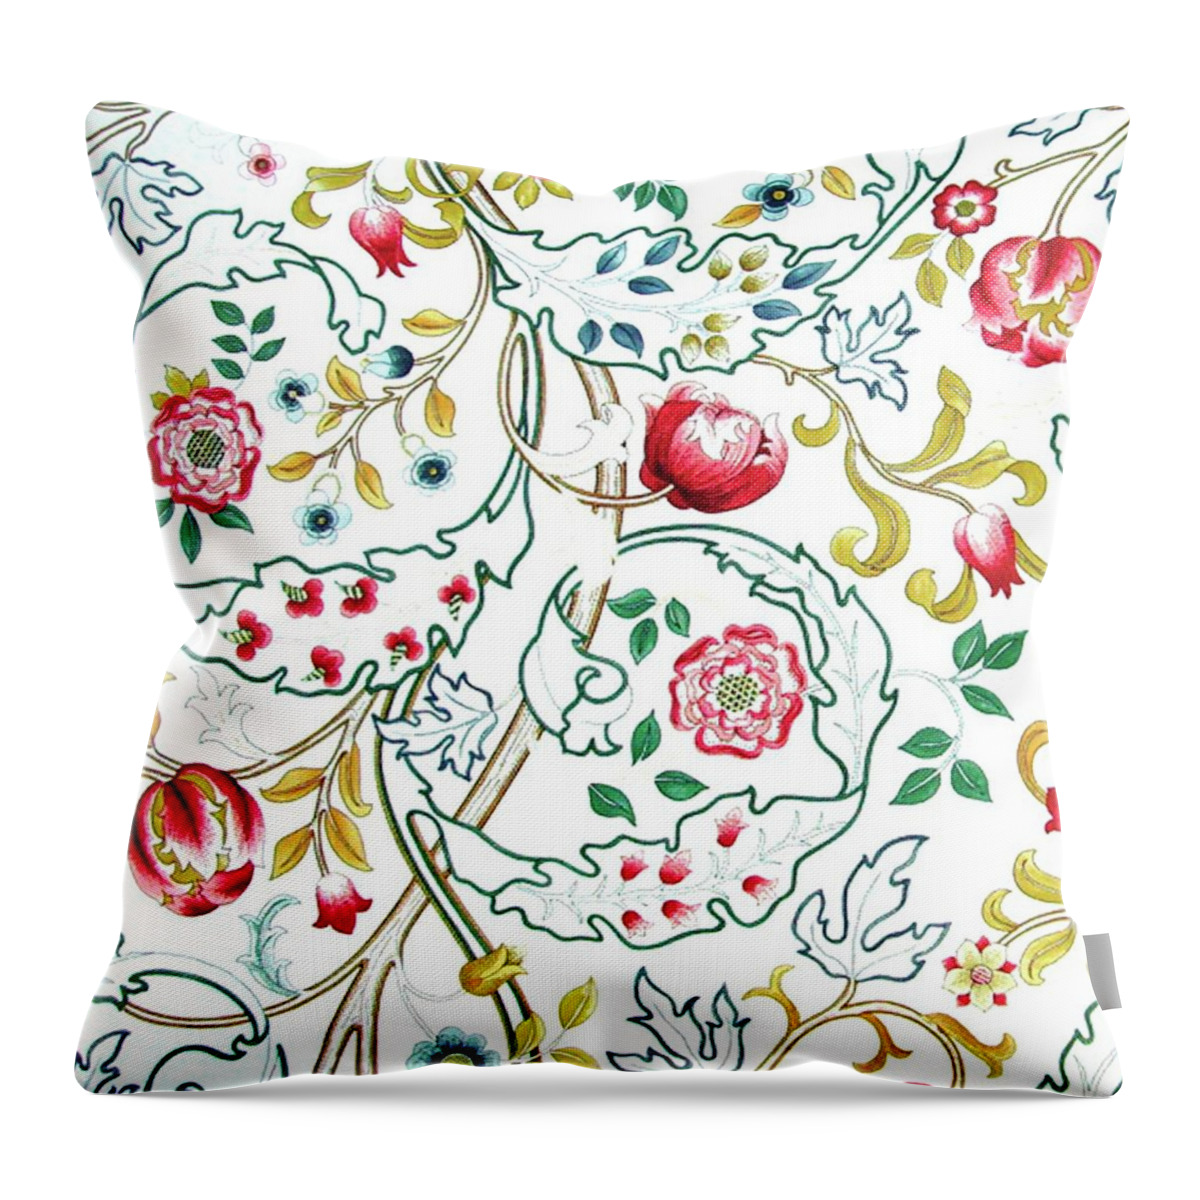 William Throw Pillow featuring the drawing Mary Isobel Design by Philip Ralley